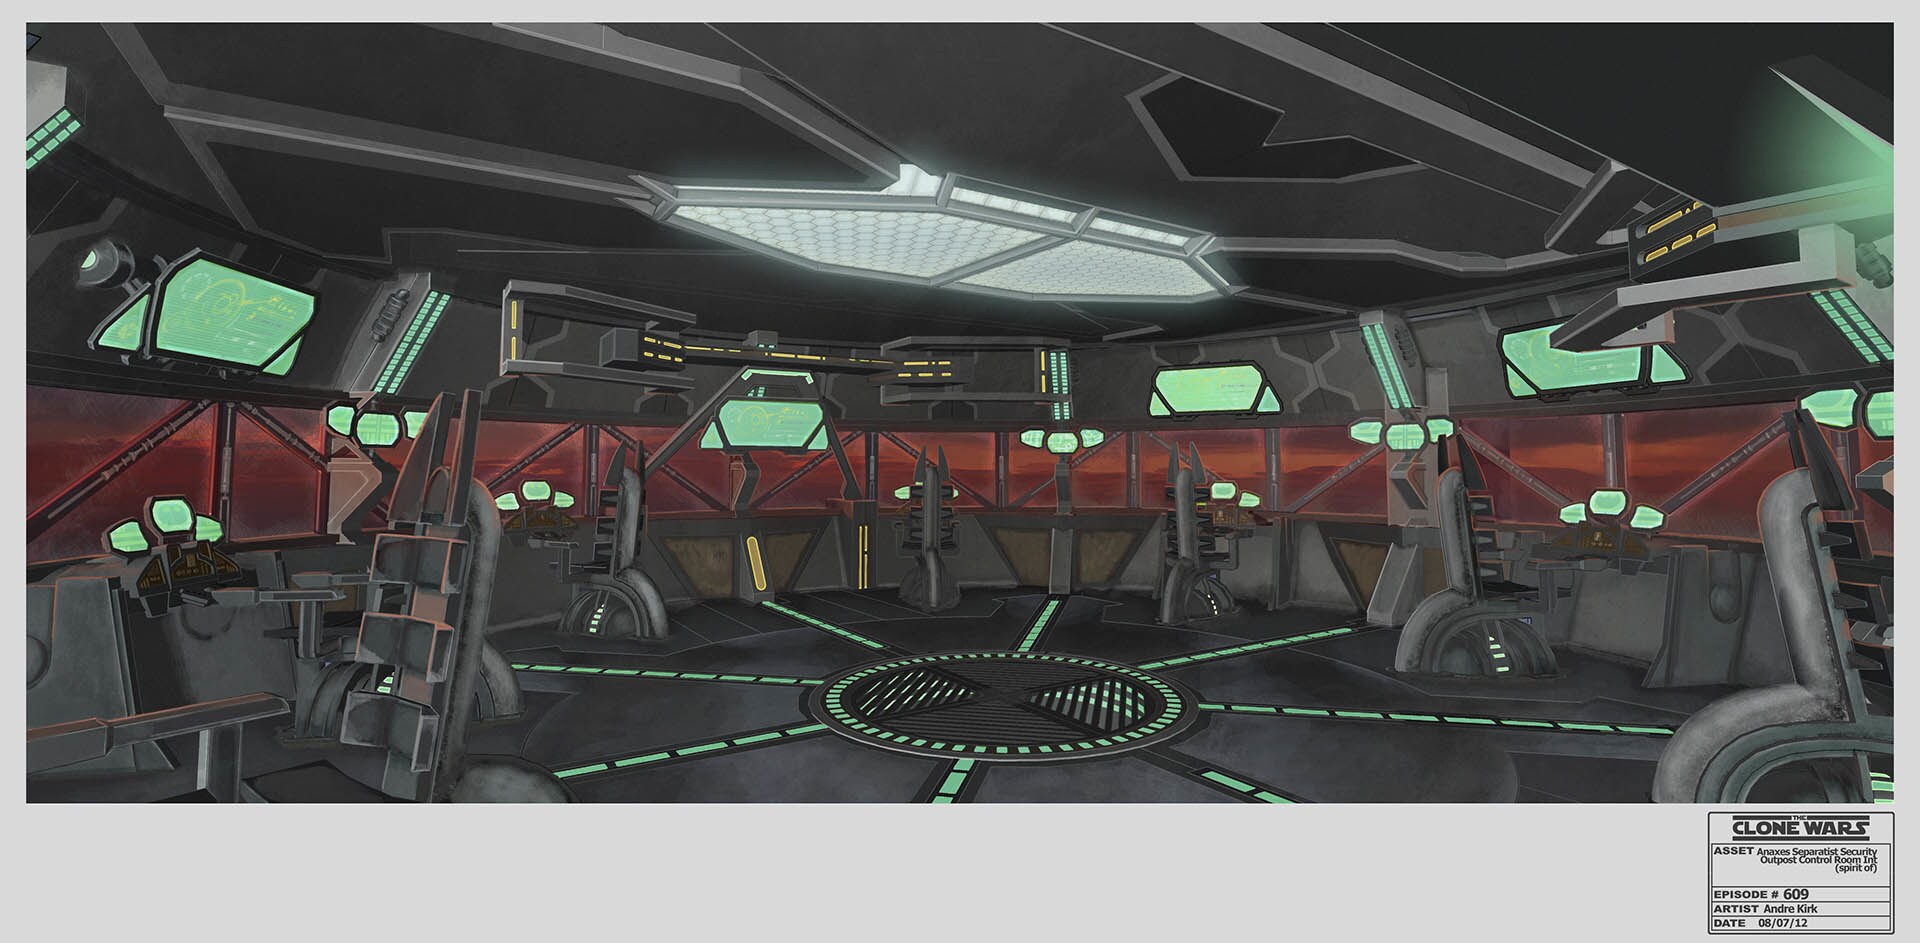 Anaxes Separatist Security Outpost control room interior by Andre Kirk